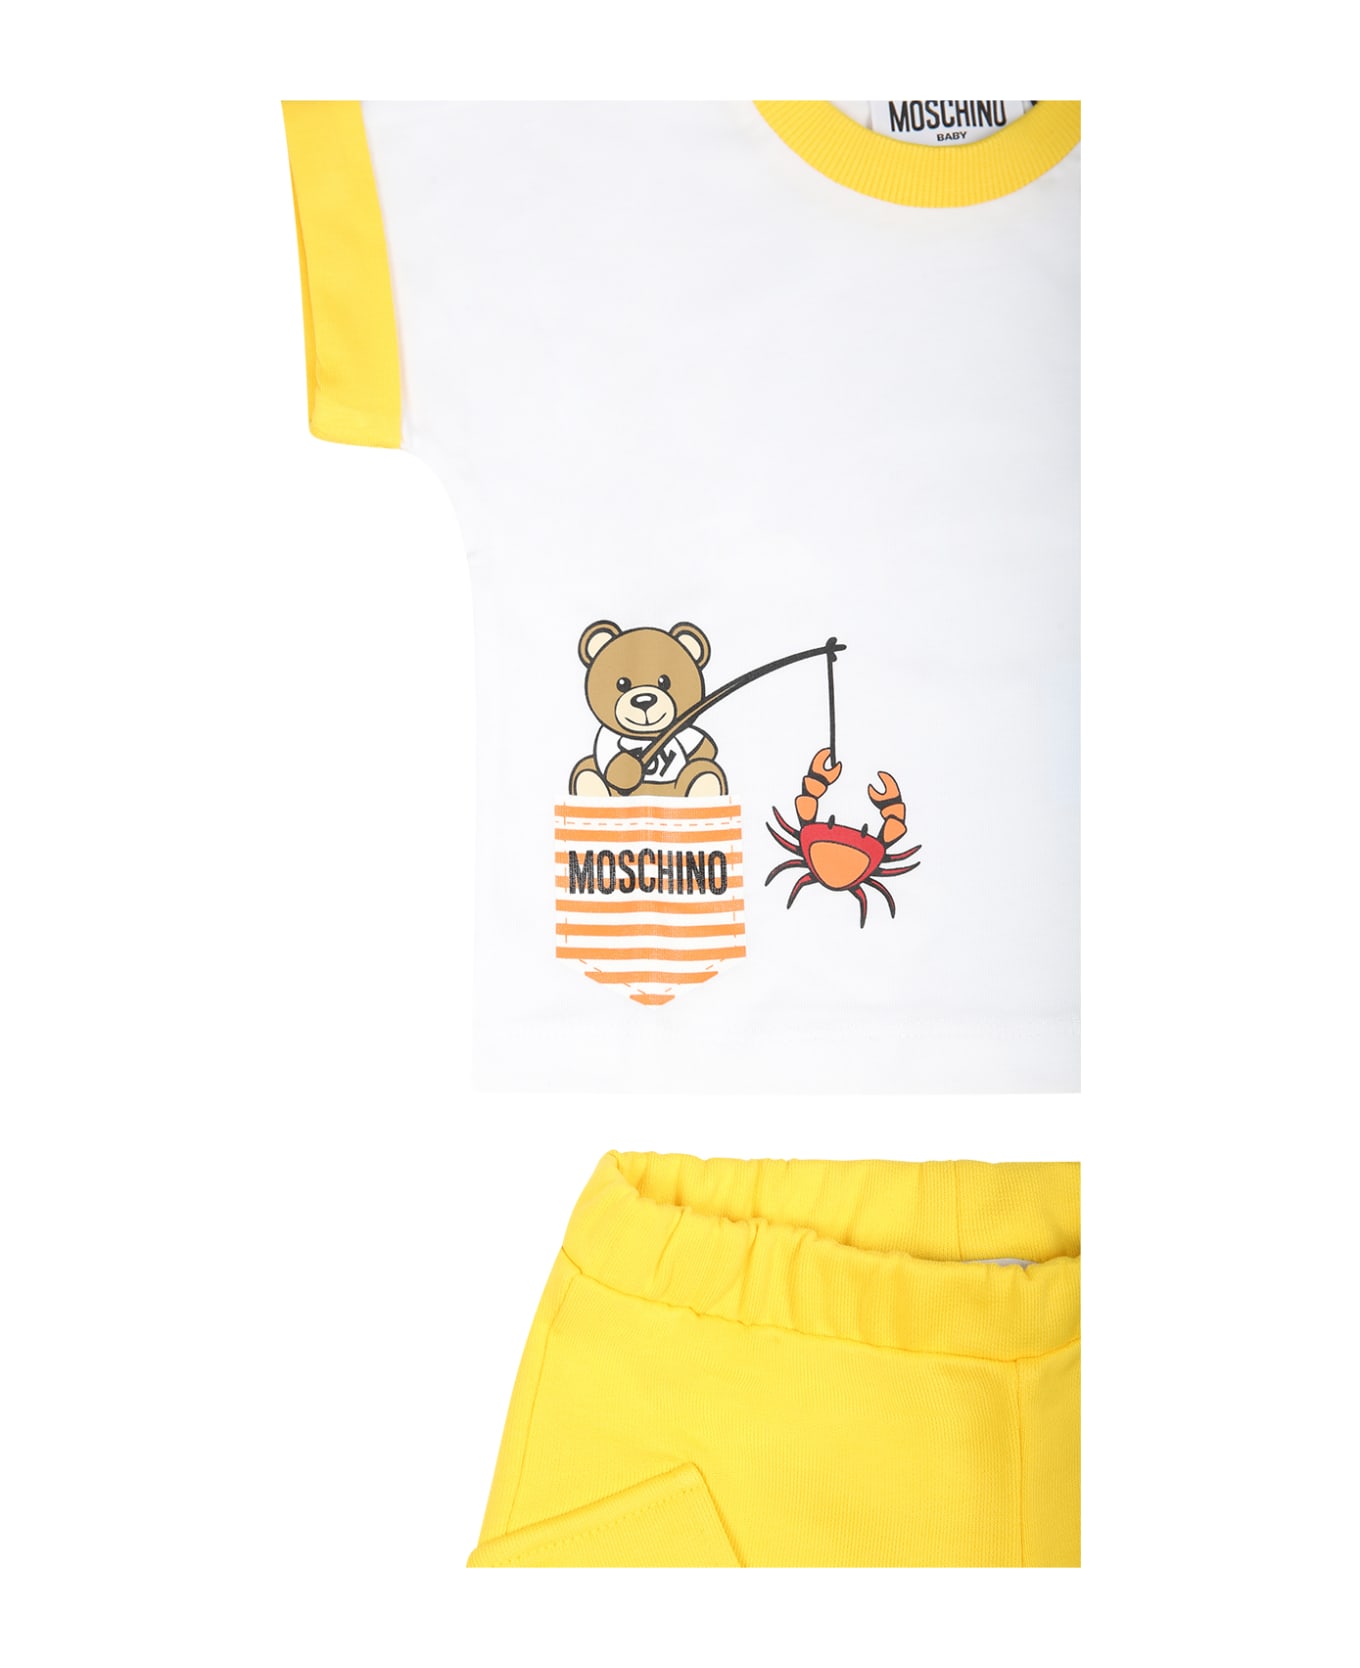 Moschino Yellow Suit For Baby Boy With Teddy Bear - White